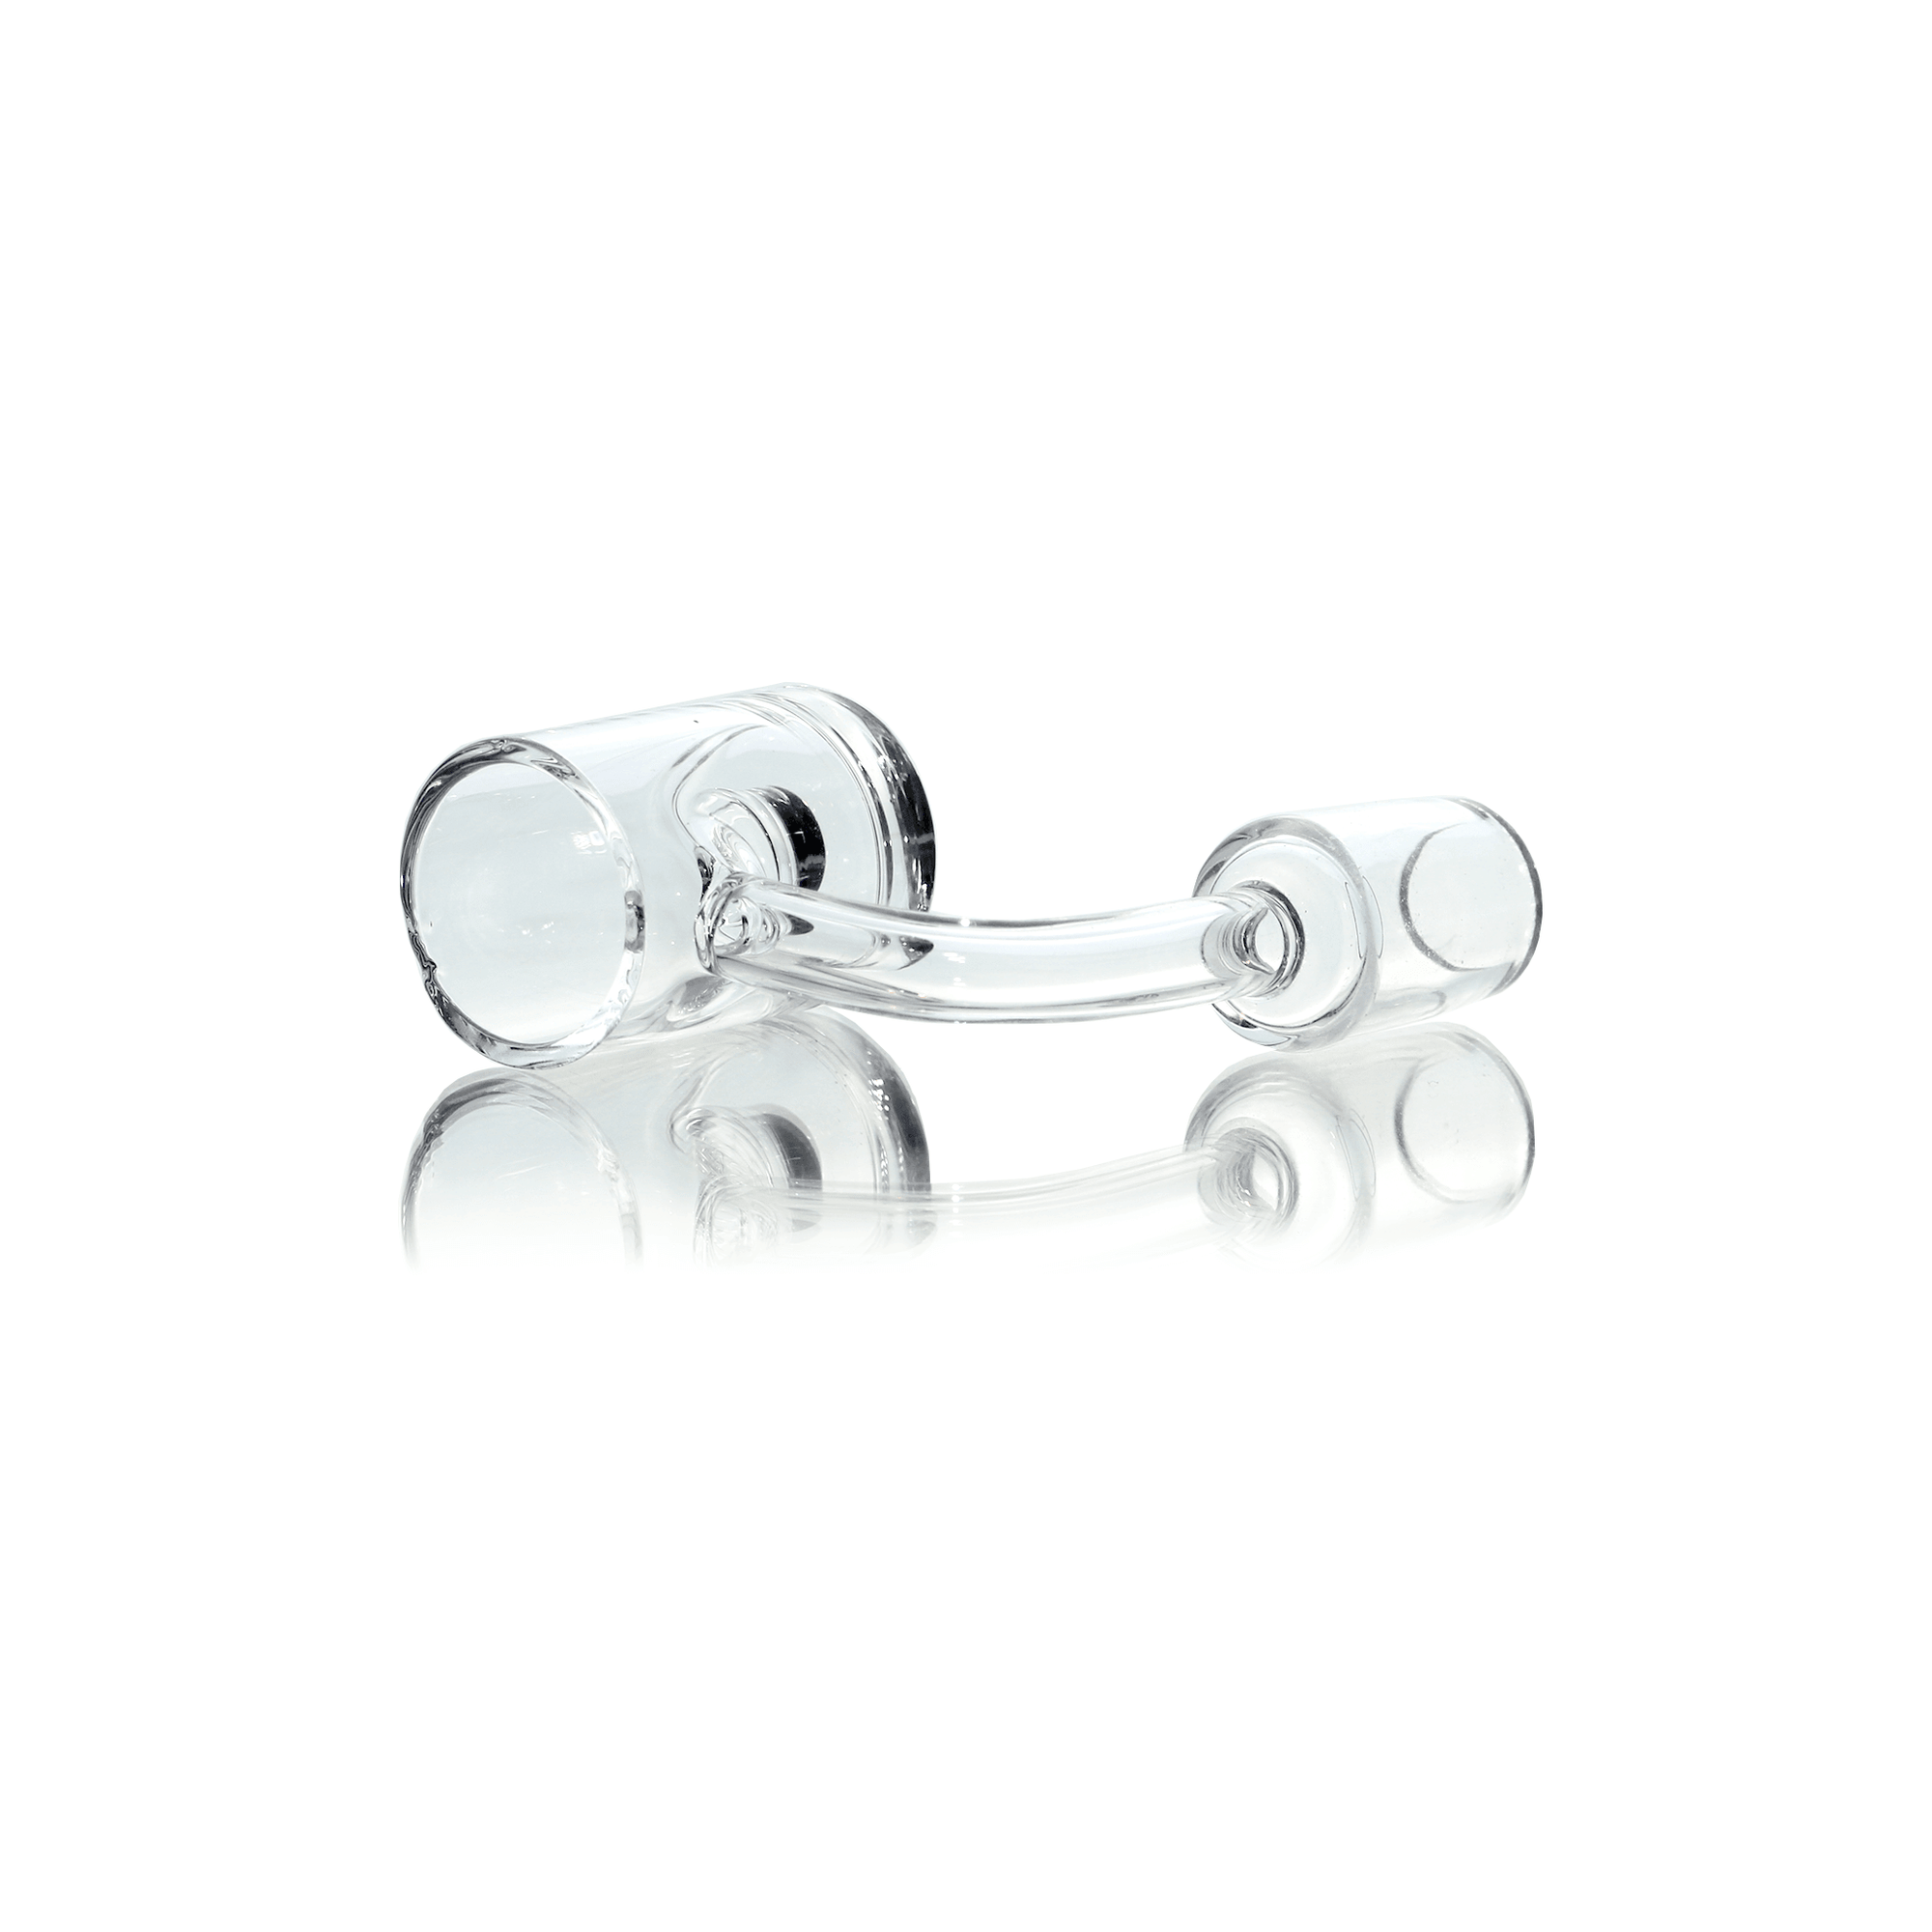 Quartz Banger Core Reactor 18mm Male With Saucer Cap | Prone Banger View | the dabbing specialists